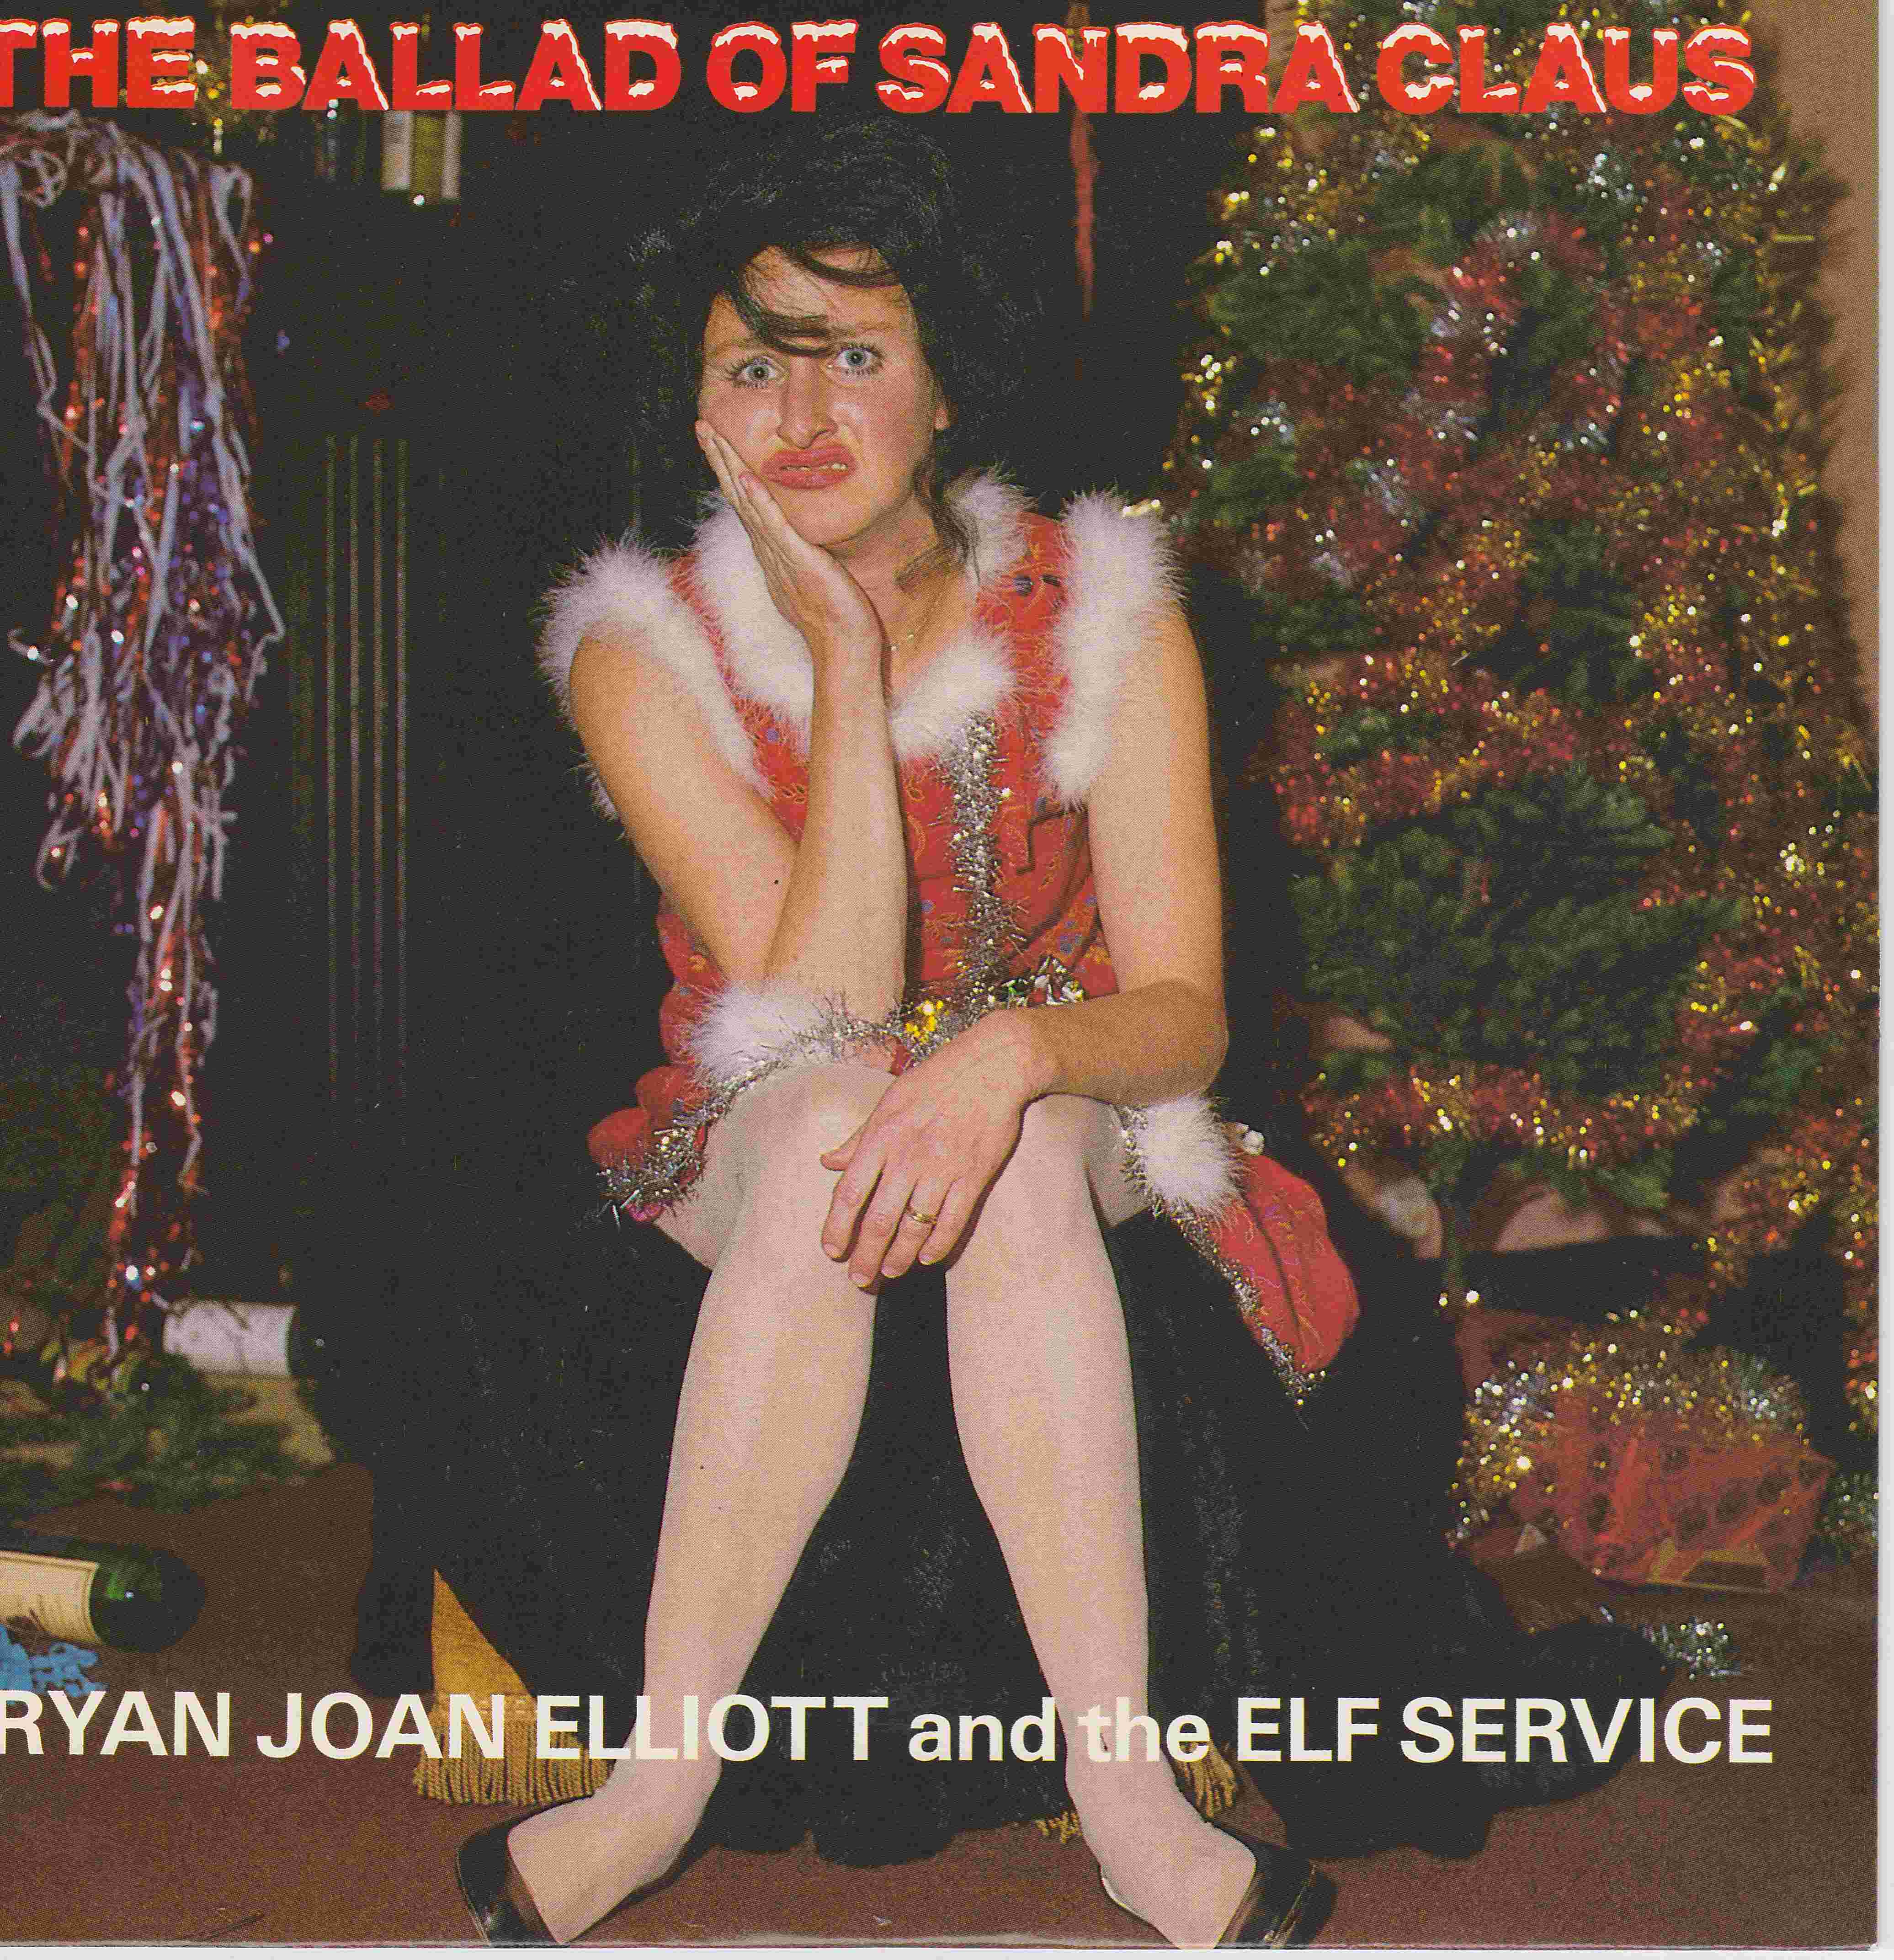 Picture of RESL 179 The ballad of Sandra Claus by artist Bryan Joan Elliott and the Elf Service from the BBC records and Tapes library